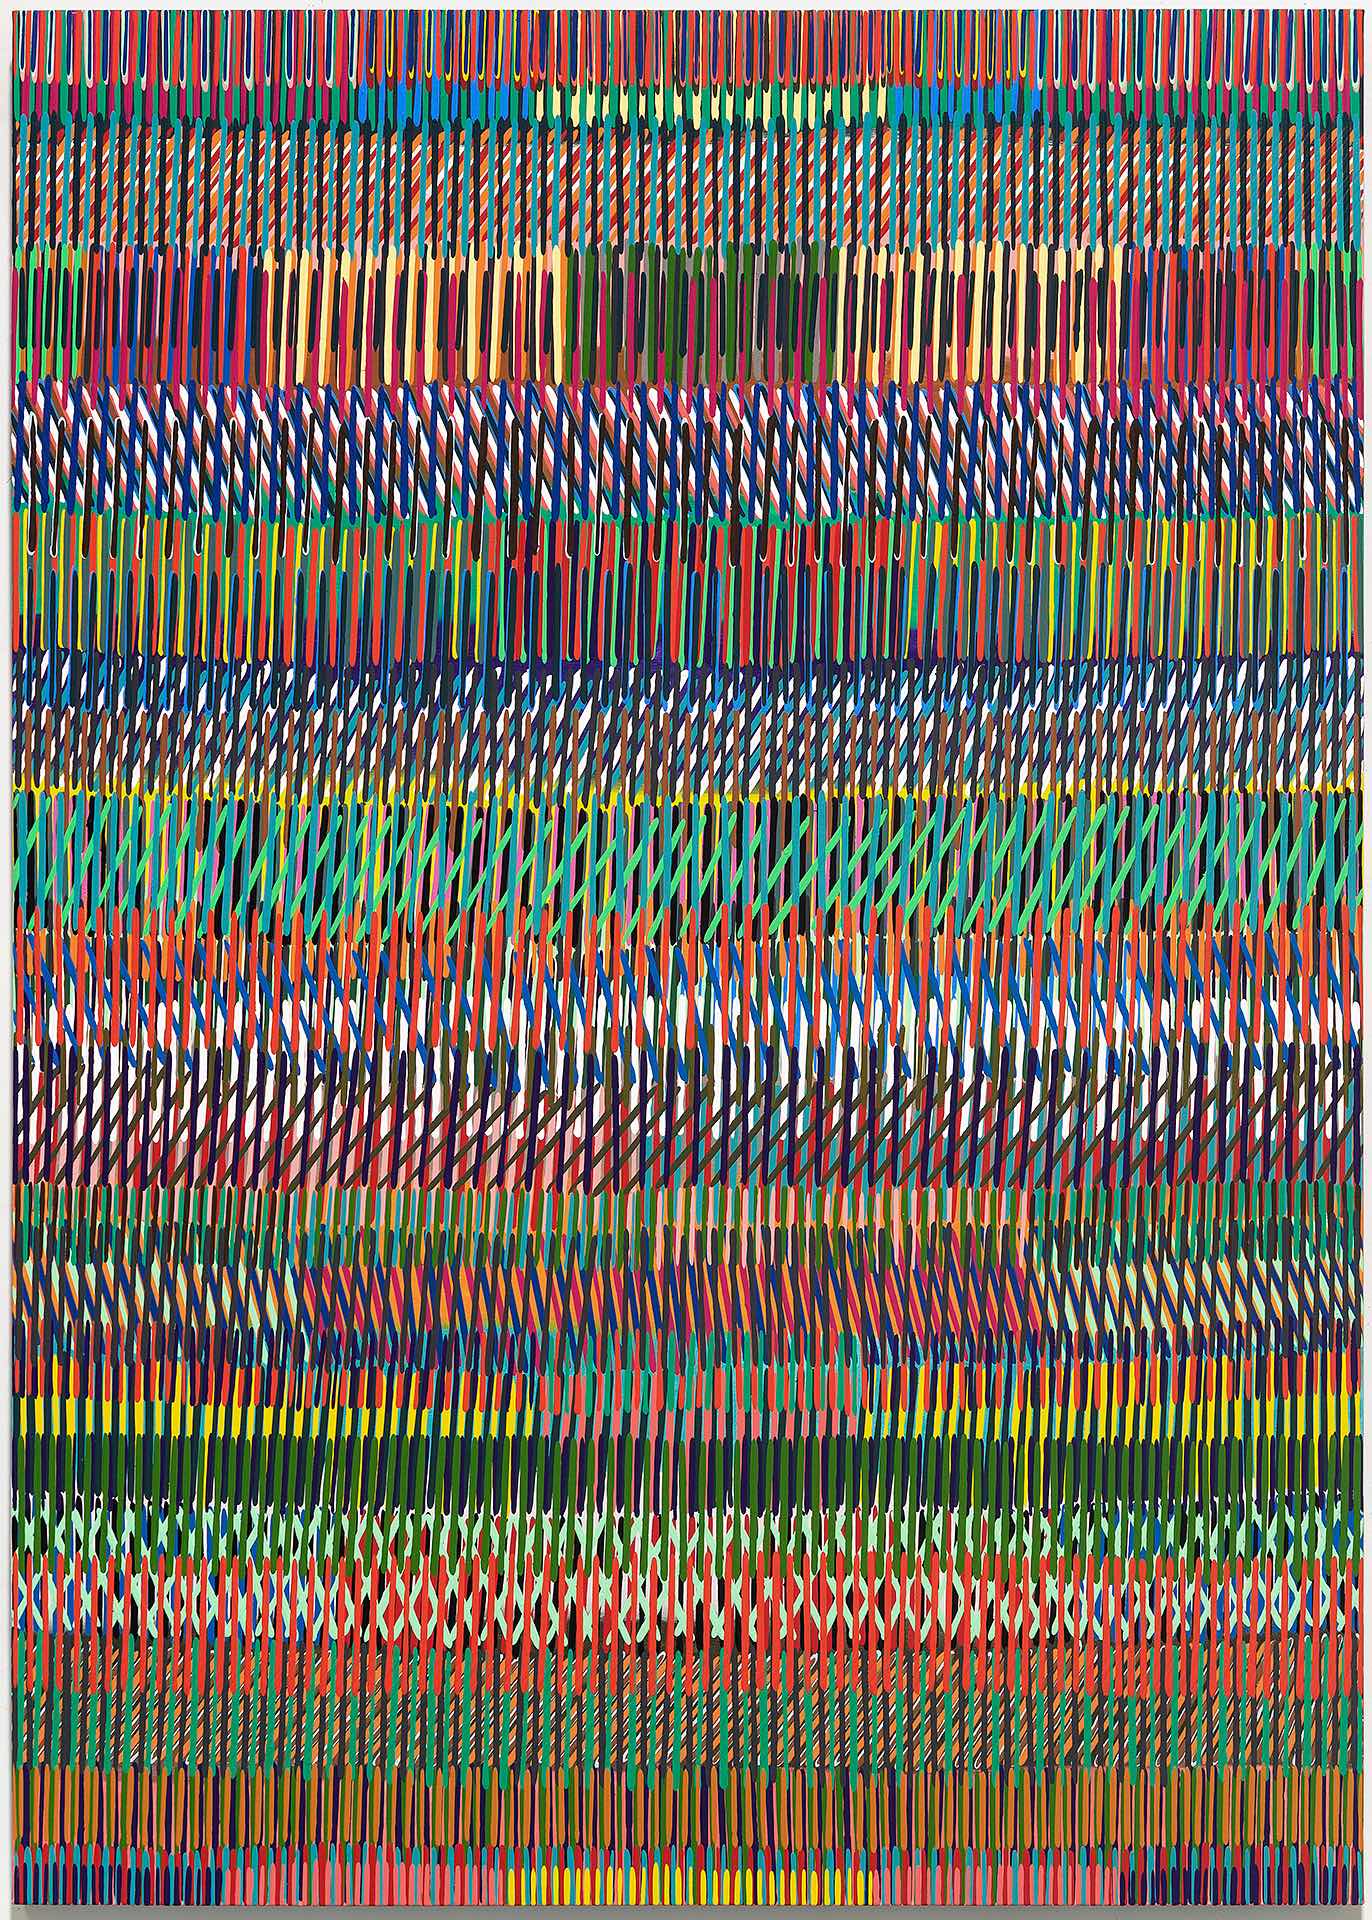 Channels and Signals, 2018, acrylic on canvas, 84 X 60 inches. Courtesy of the artist and Sherry Leedy Contemporary Art; photo by E.G. Schempf.